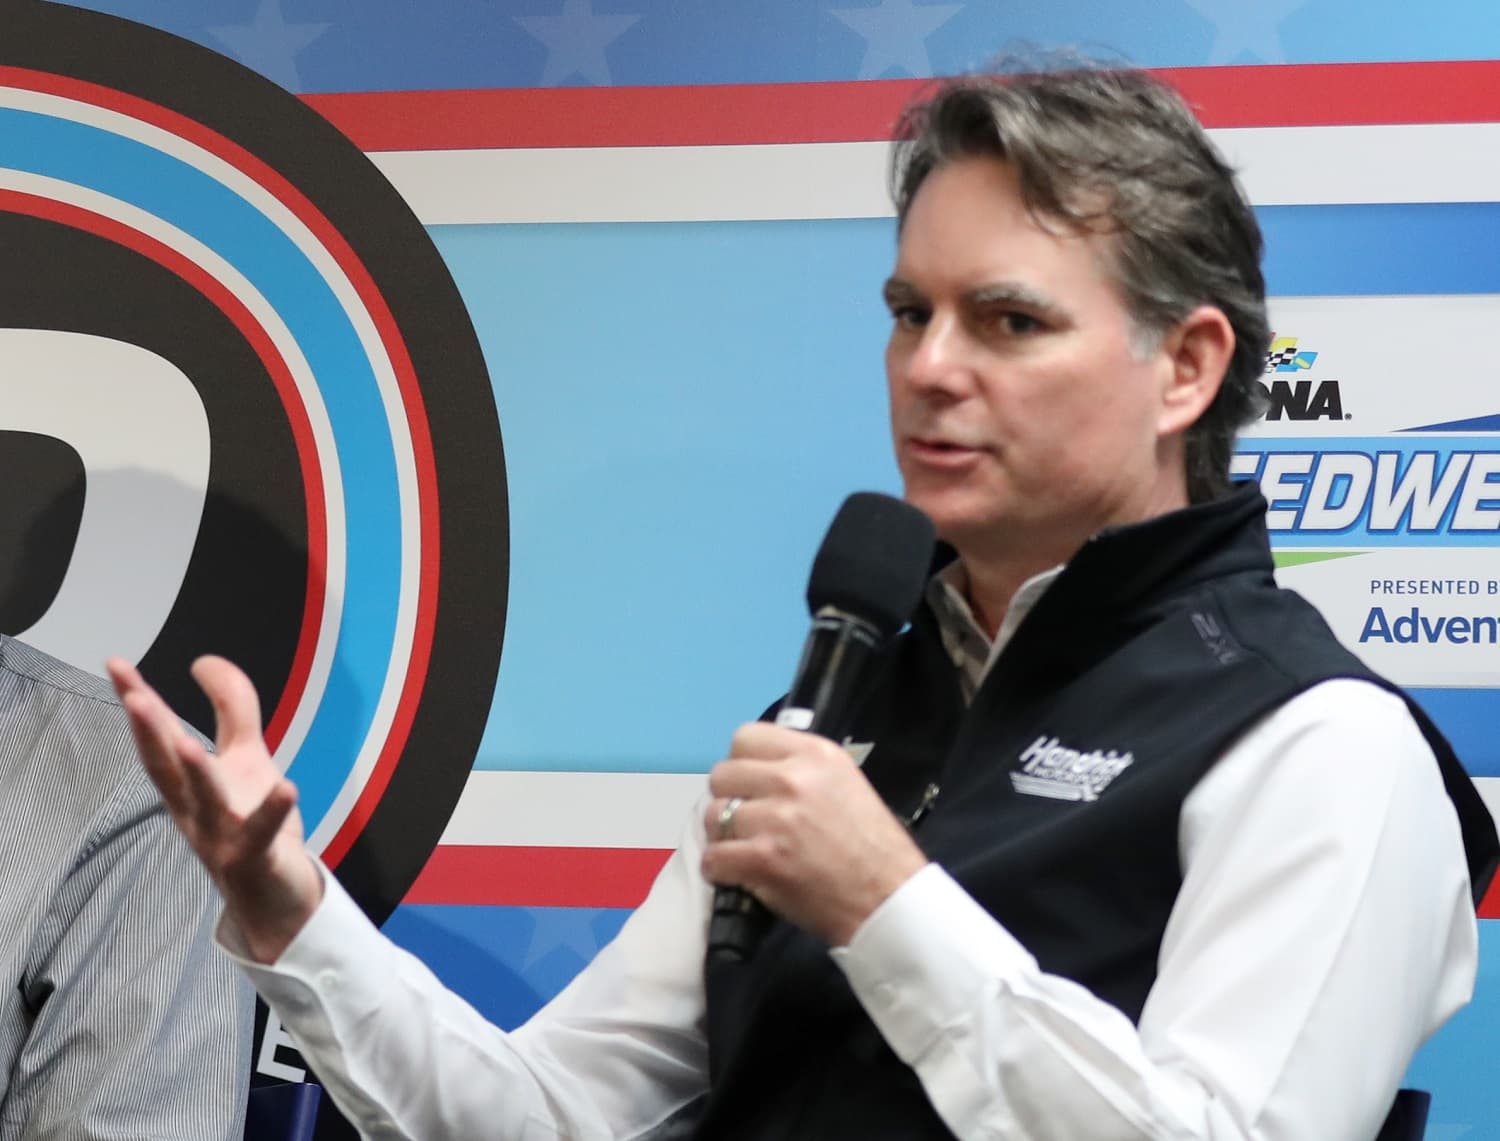 NASCAR Hall of Fame driver Jeff Gordon speak to the media during a press conference prior to the NASCAR Cup Series Daytona 500 on Feb. 19, 2023. |  Courtney Culbreath/Getty Images